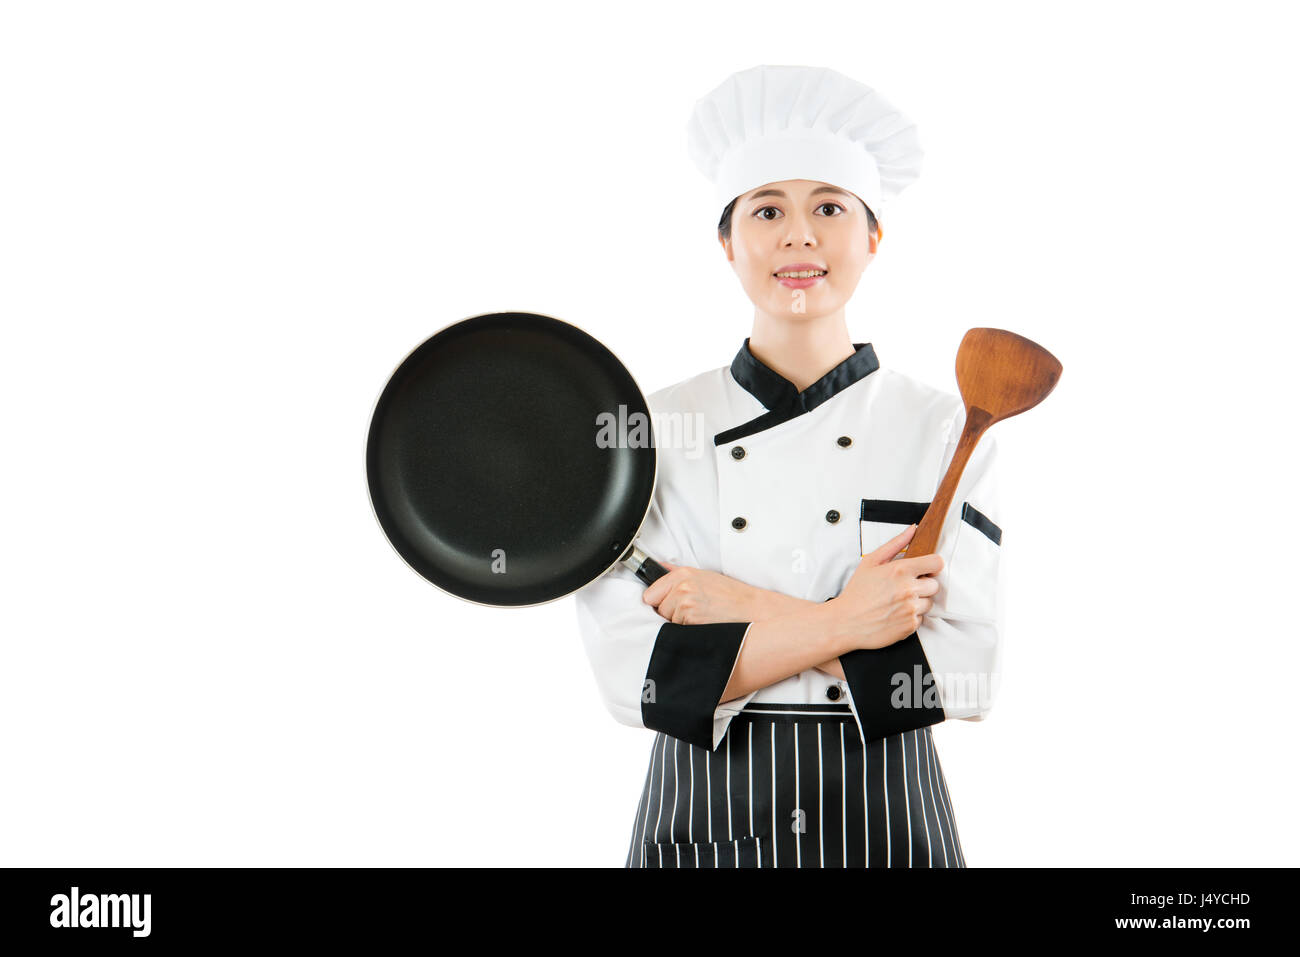 professional chef showing high level pan and easy use wooden spatula standing in blank white wall studio shooting copyspace image as advertising image Stock Photo